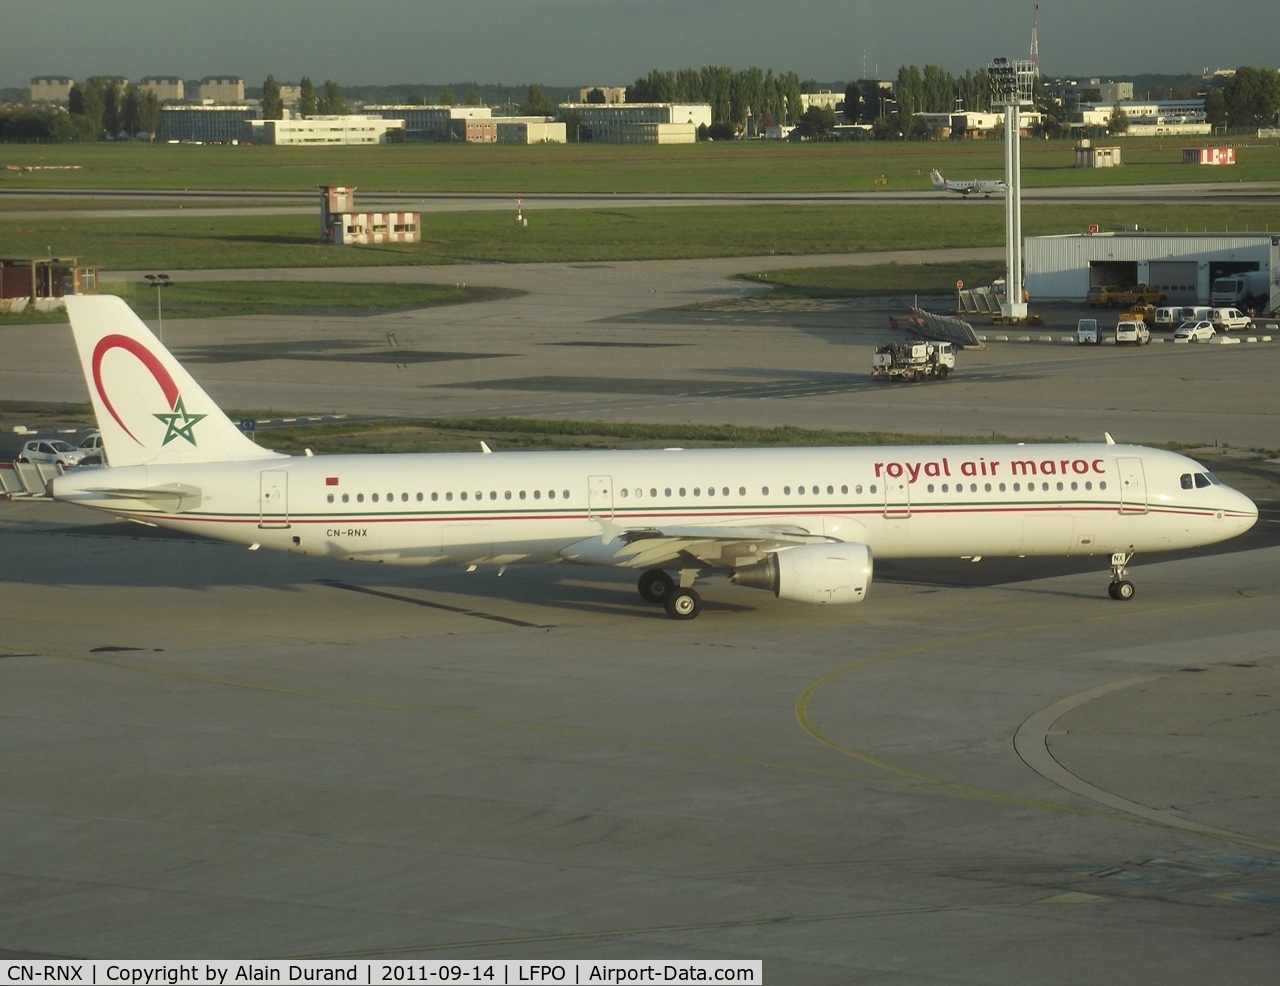 CN-RNX, 2003 Airbus A321-211 C/N 2064, Royal Air Maroc is up for some heavy restructuration calling for the lay-off of 1,500 staff members and the sale of 10 aircrafts including all four A321s